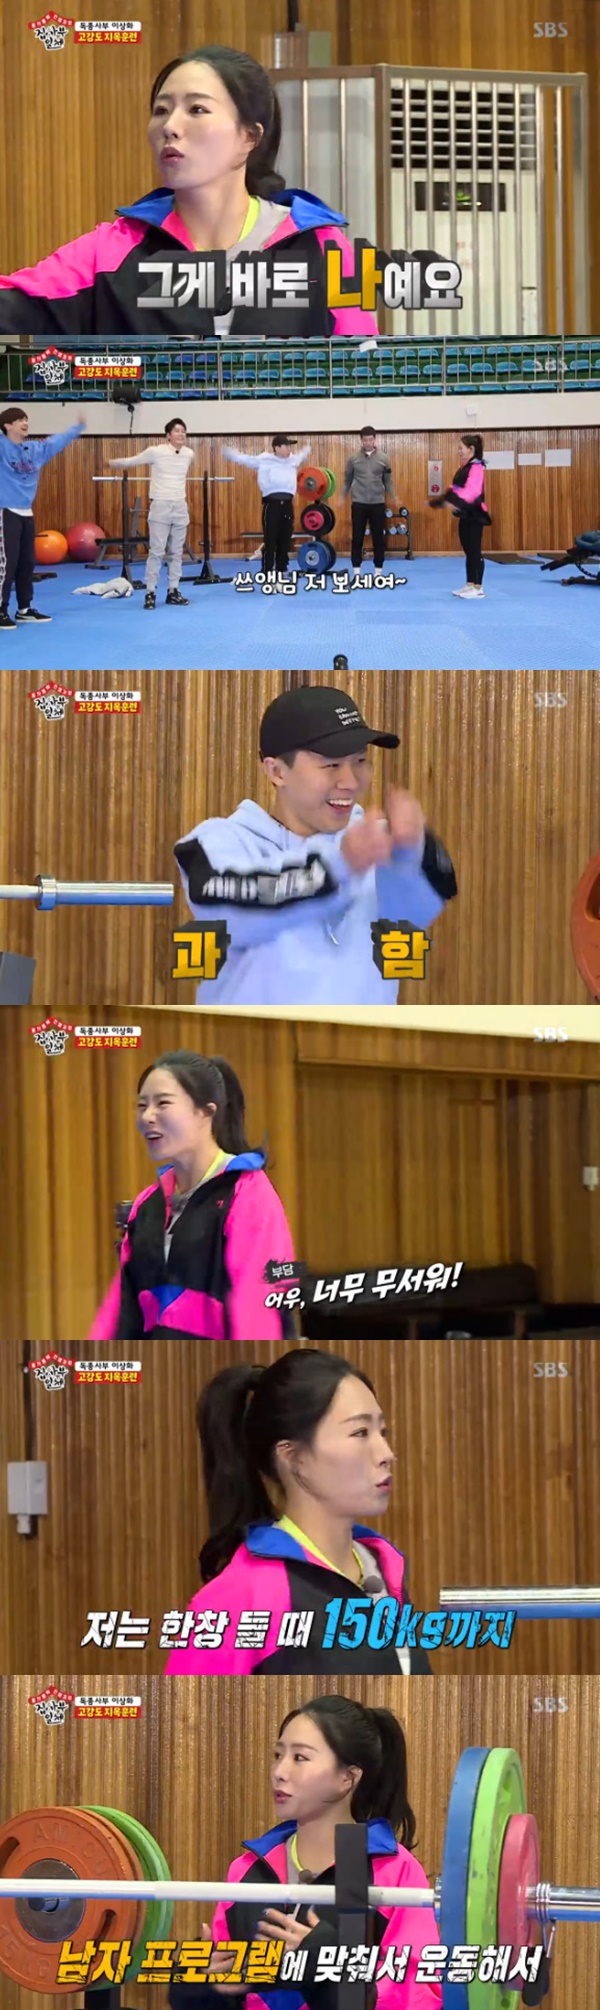 All The Butlers Lee Sang-hwa talks about his differences with Seung-Hoon LeeIn the SBS entertainment program All The Butlers broadcasted on the 10th, Lee Seung-gi Lee Sang-yoon Yang Se-hyeong foster material was shown to meet speed skater Lee Sang-hwa as master.On this day, the members went on high-intensity training under the command of Lee Sang-hwa; while they were taking care of themselves prior to training, Yang Se-hyeong over-acted and said, Teacher, look at me.Who did the best, said Lee Sang-hwa, who laughed at Yang Se-hyeongs comments, saying: Its so scary.Lee Seung-gi asked, Do you have such a friend even when you go into the Taeung? Lee Sang-hwa said, There are these friends, I should be interested.(with Yang Se-hyeong) it works, thats the source of confidence, everyone has to see me, she said, laughing.Then I took a Babel exercise and Lee Sang-hwa said, I heard up to 150kg, I worked out for the mens program.Warming up is 60kg, he surprised the members, adding 20kg more than usual to show the Babel movement at 80kg.Lee Sang-hwa also suggested that we play bench jumps, Lee Seung-gi said, Is this a sport that many skaters do?I had a similar training during Master Seung-Hoon Lee, said speed skater Seung-Hoon Lee, who appeared as Master.Lee Sang-hwa said, But did not Seung-hoon run in place. I pass. Seung-hoon and I are different.Lee Seung-gi said, St. Seung-Hoon Lee also said that he did one more time than others. Lee Sang-hwa said, I did 10 more times.So I came to this place, he said. Seung-hoon is a player I admire. But the sport is different.I have to use my momentary power. 